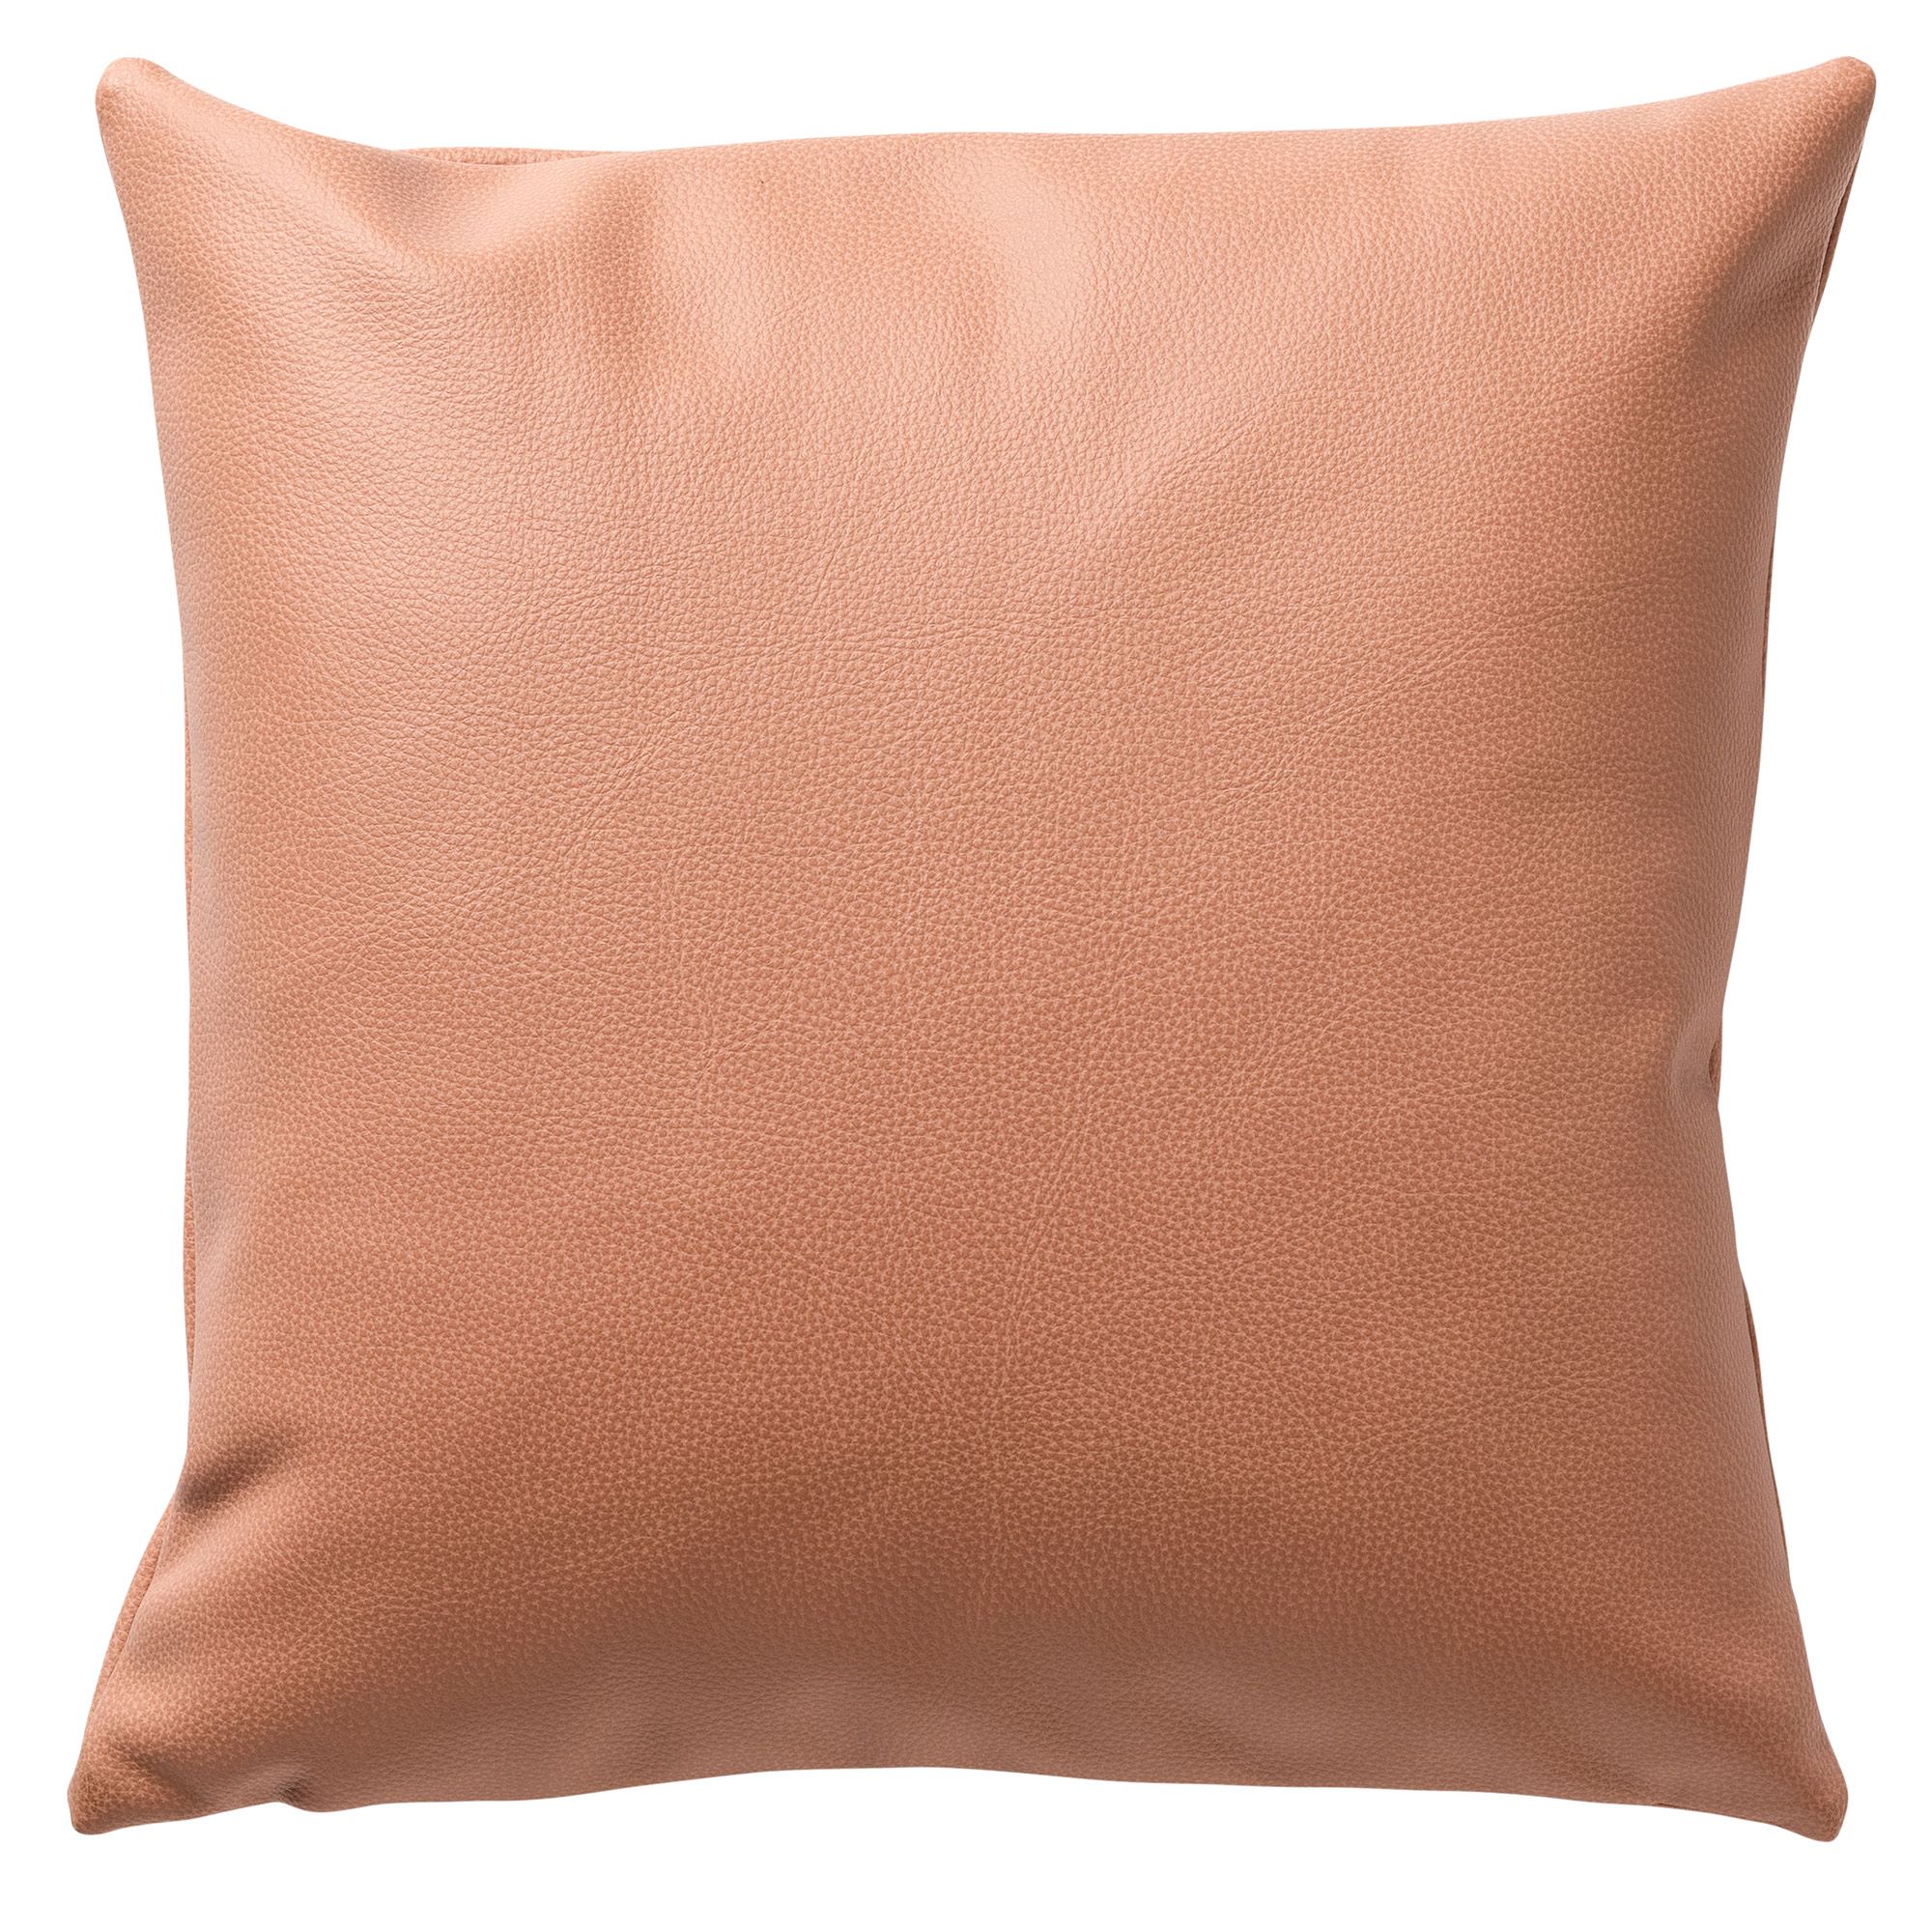 JARED - Cushion 45x45 cm - leather look - cool solid colour - Cork - pink